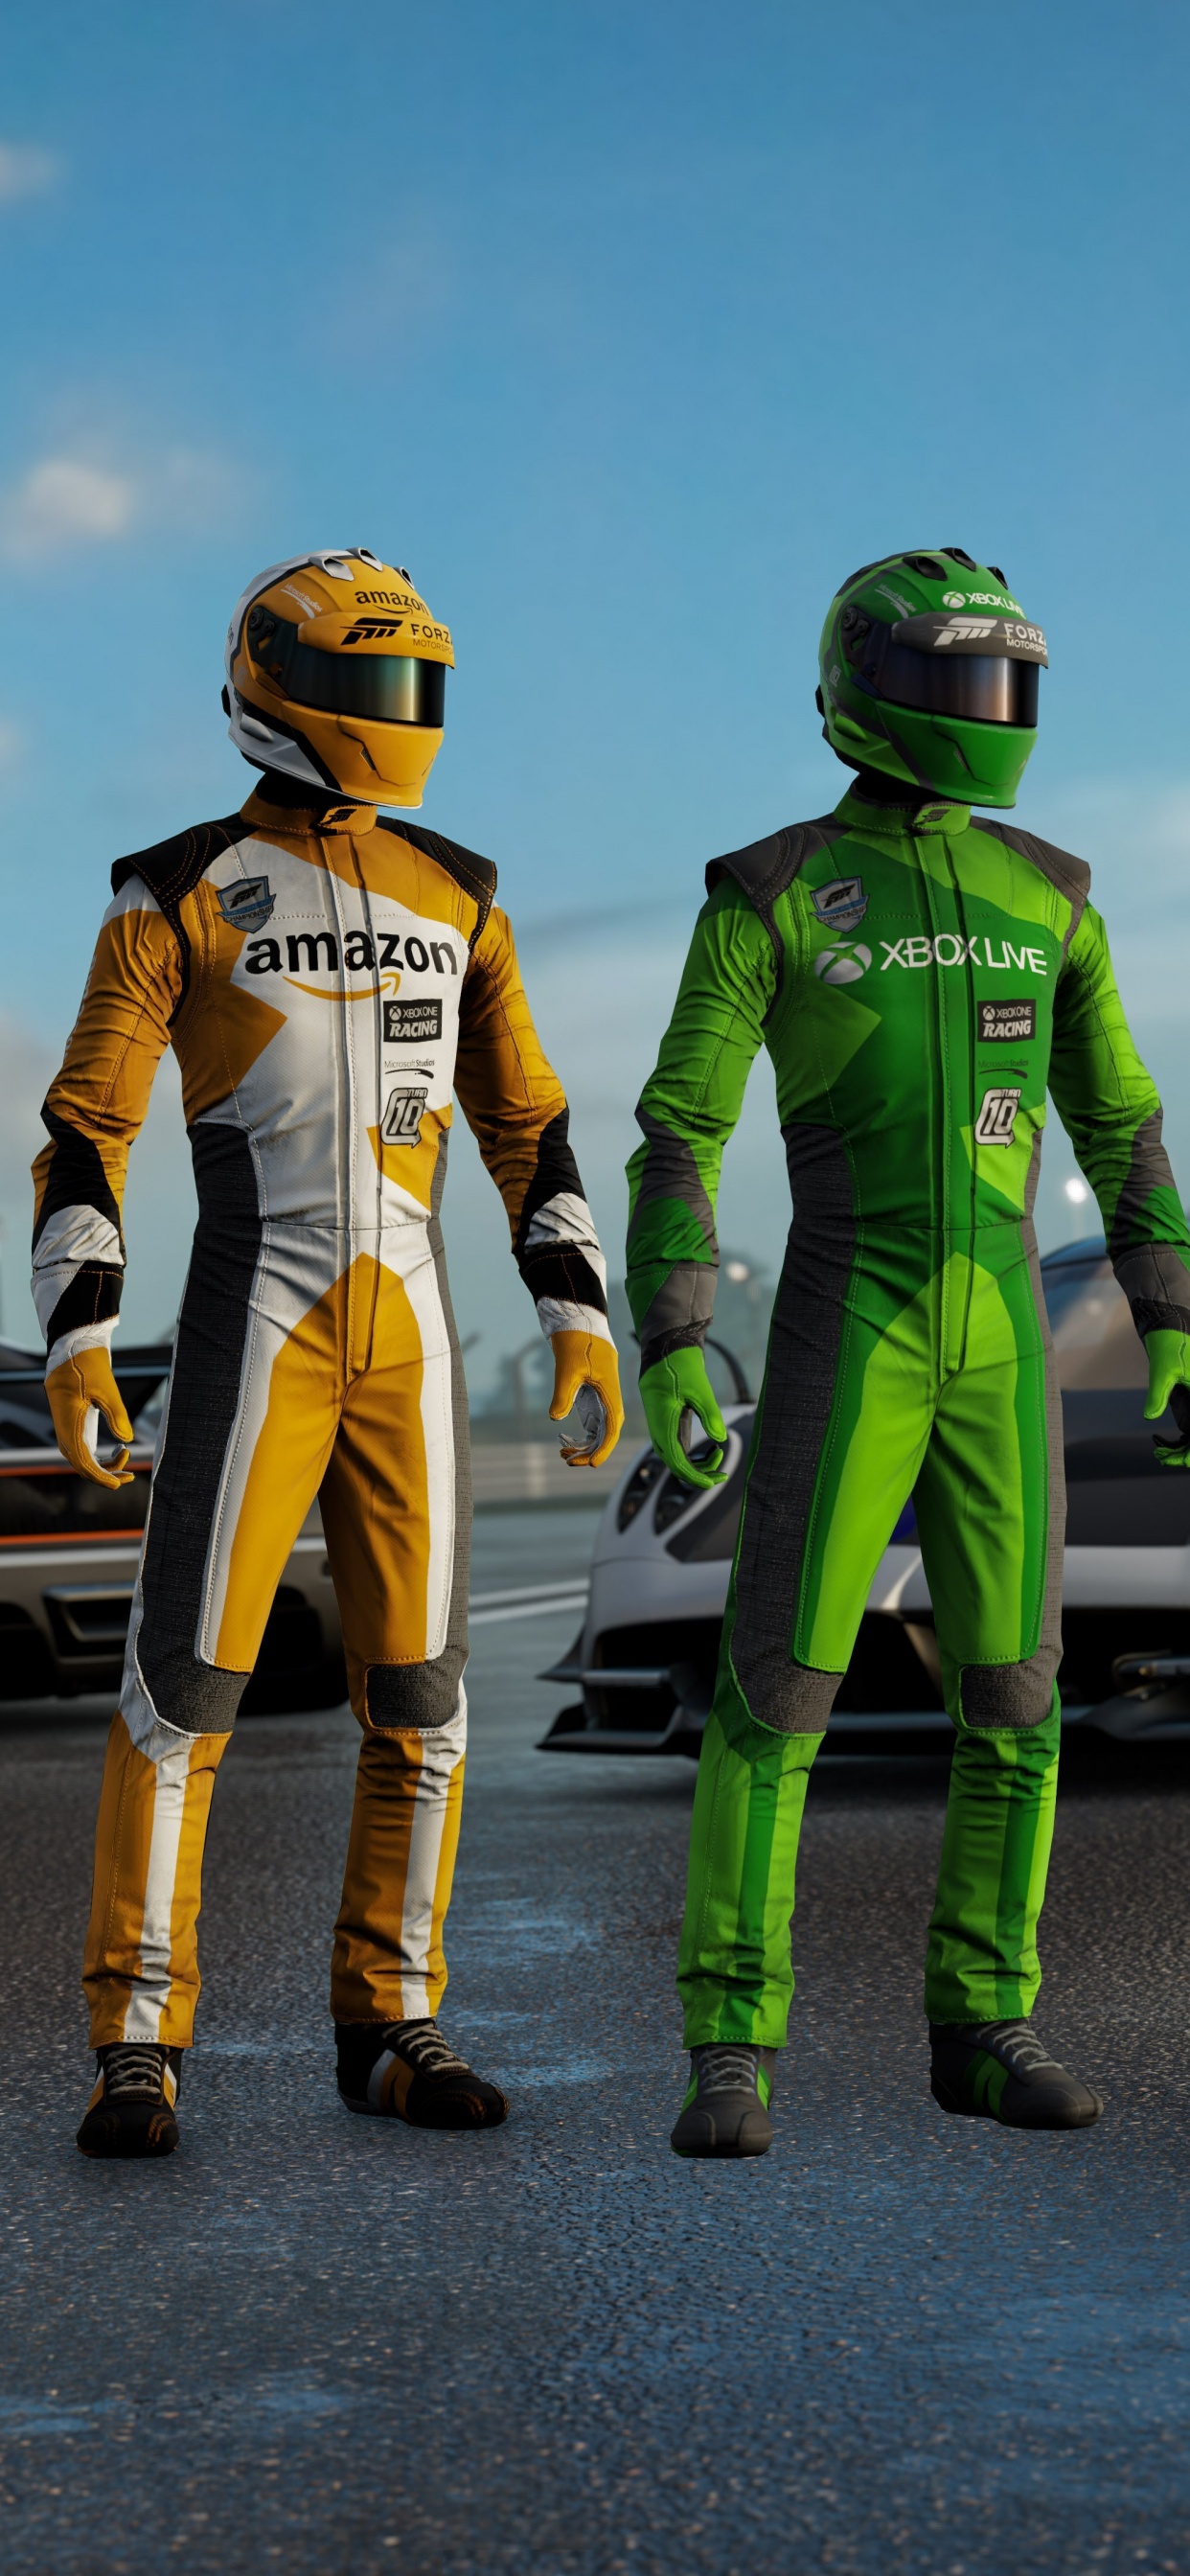 2 Men in Green and Yellow Helmet and Helmet Standing Beside White Sports Car During Daytime. Wallpaper in 1242x2688 Resolution